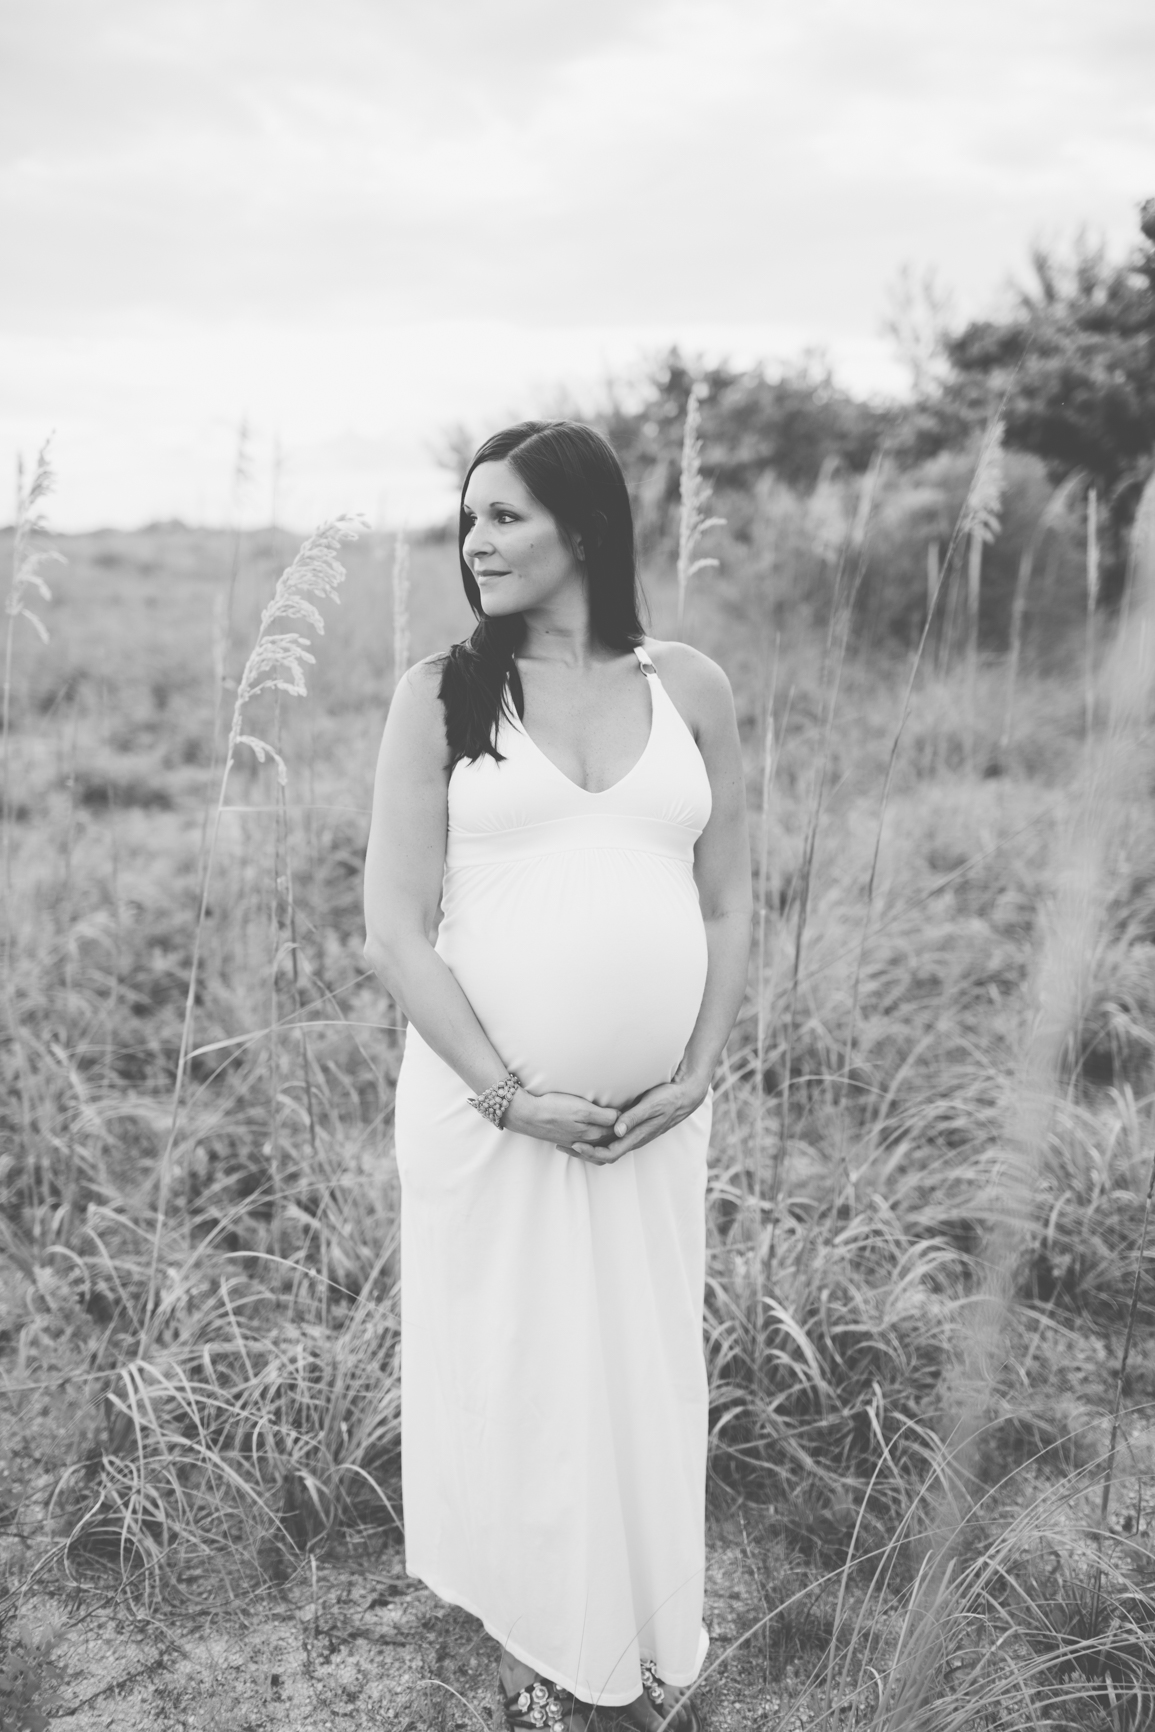 and then there were 4! — Alyssa Shrock Photography